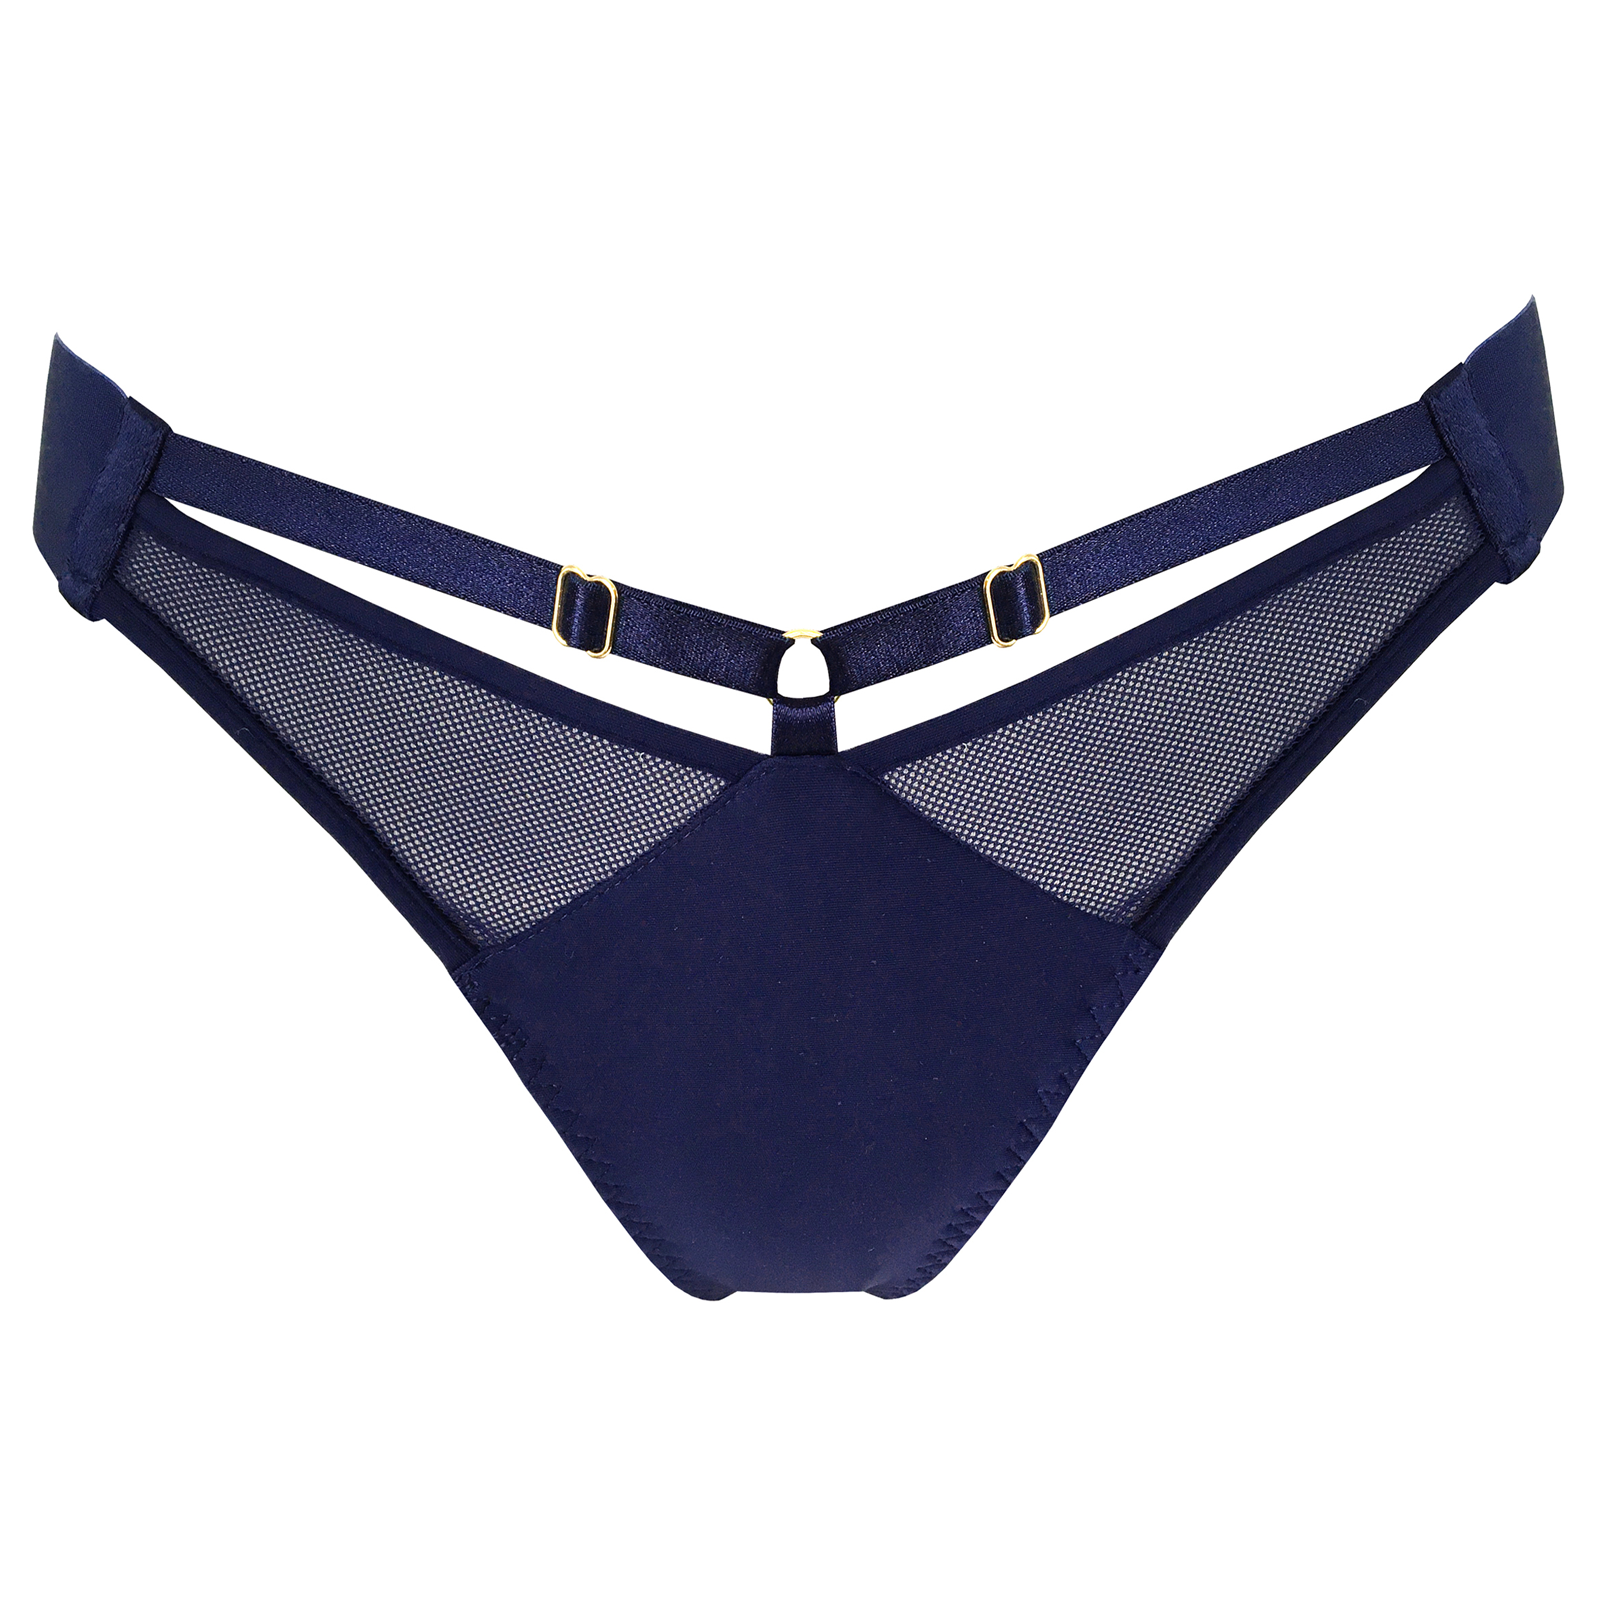 Rey thong by Bordelle navy blue